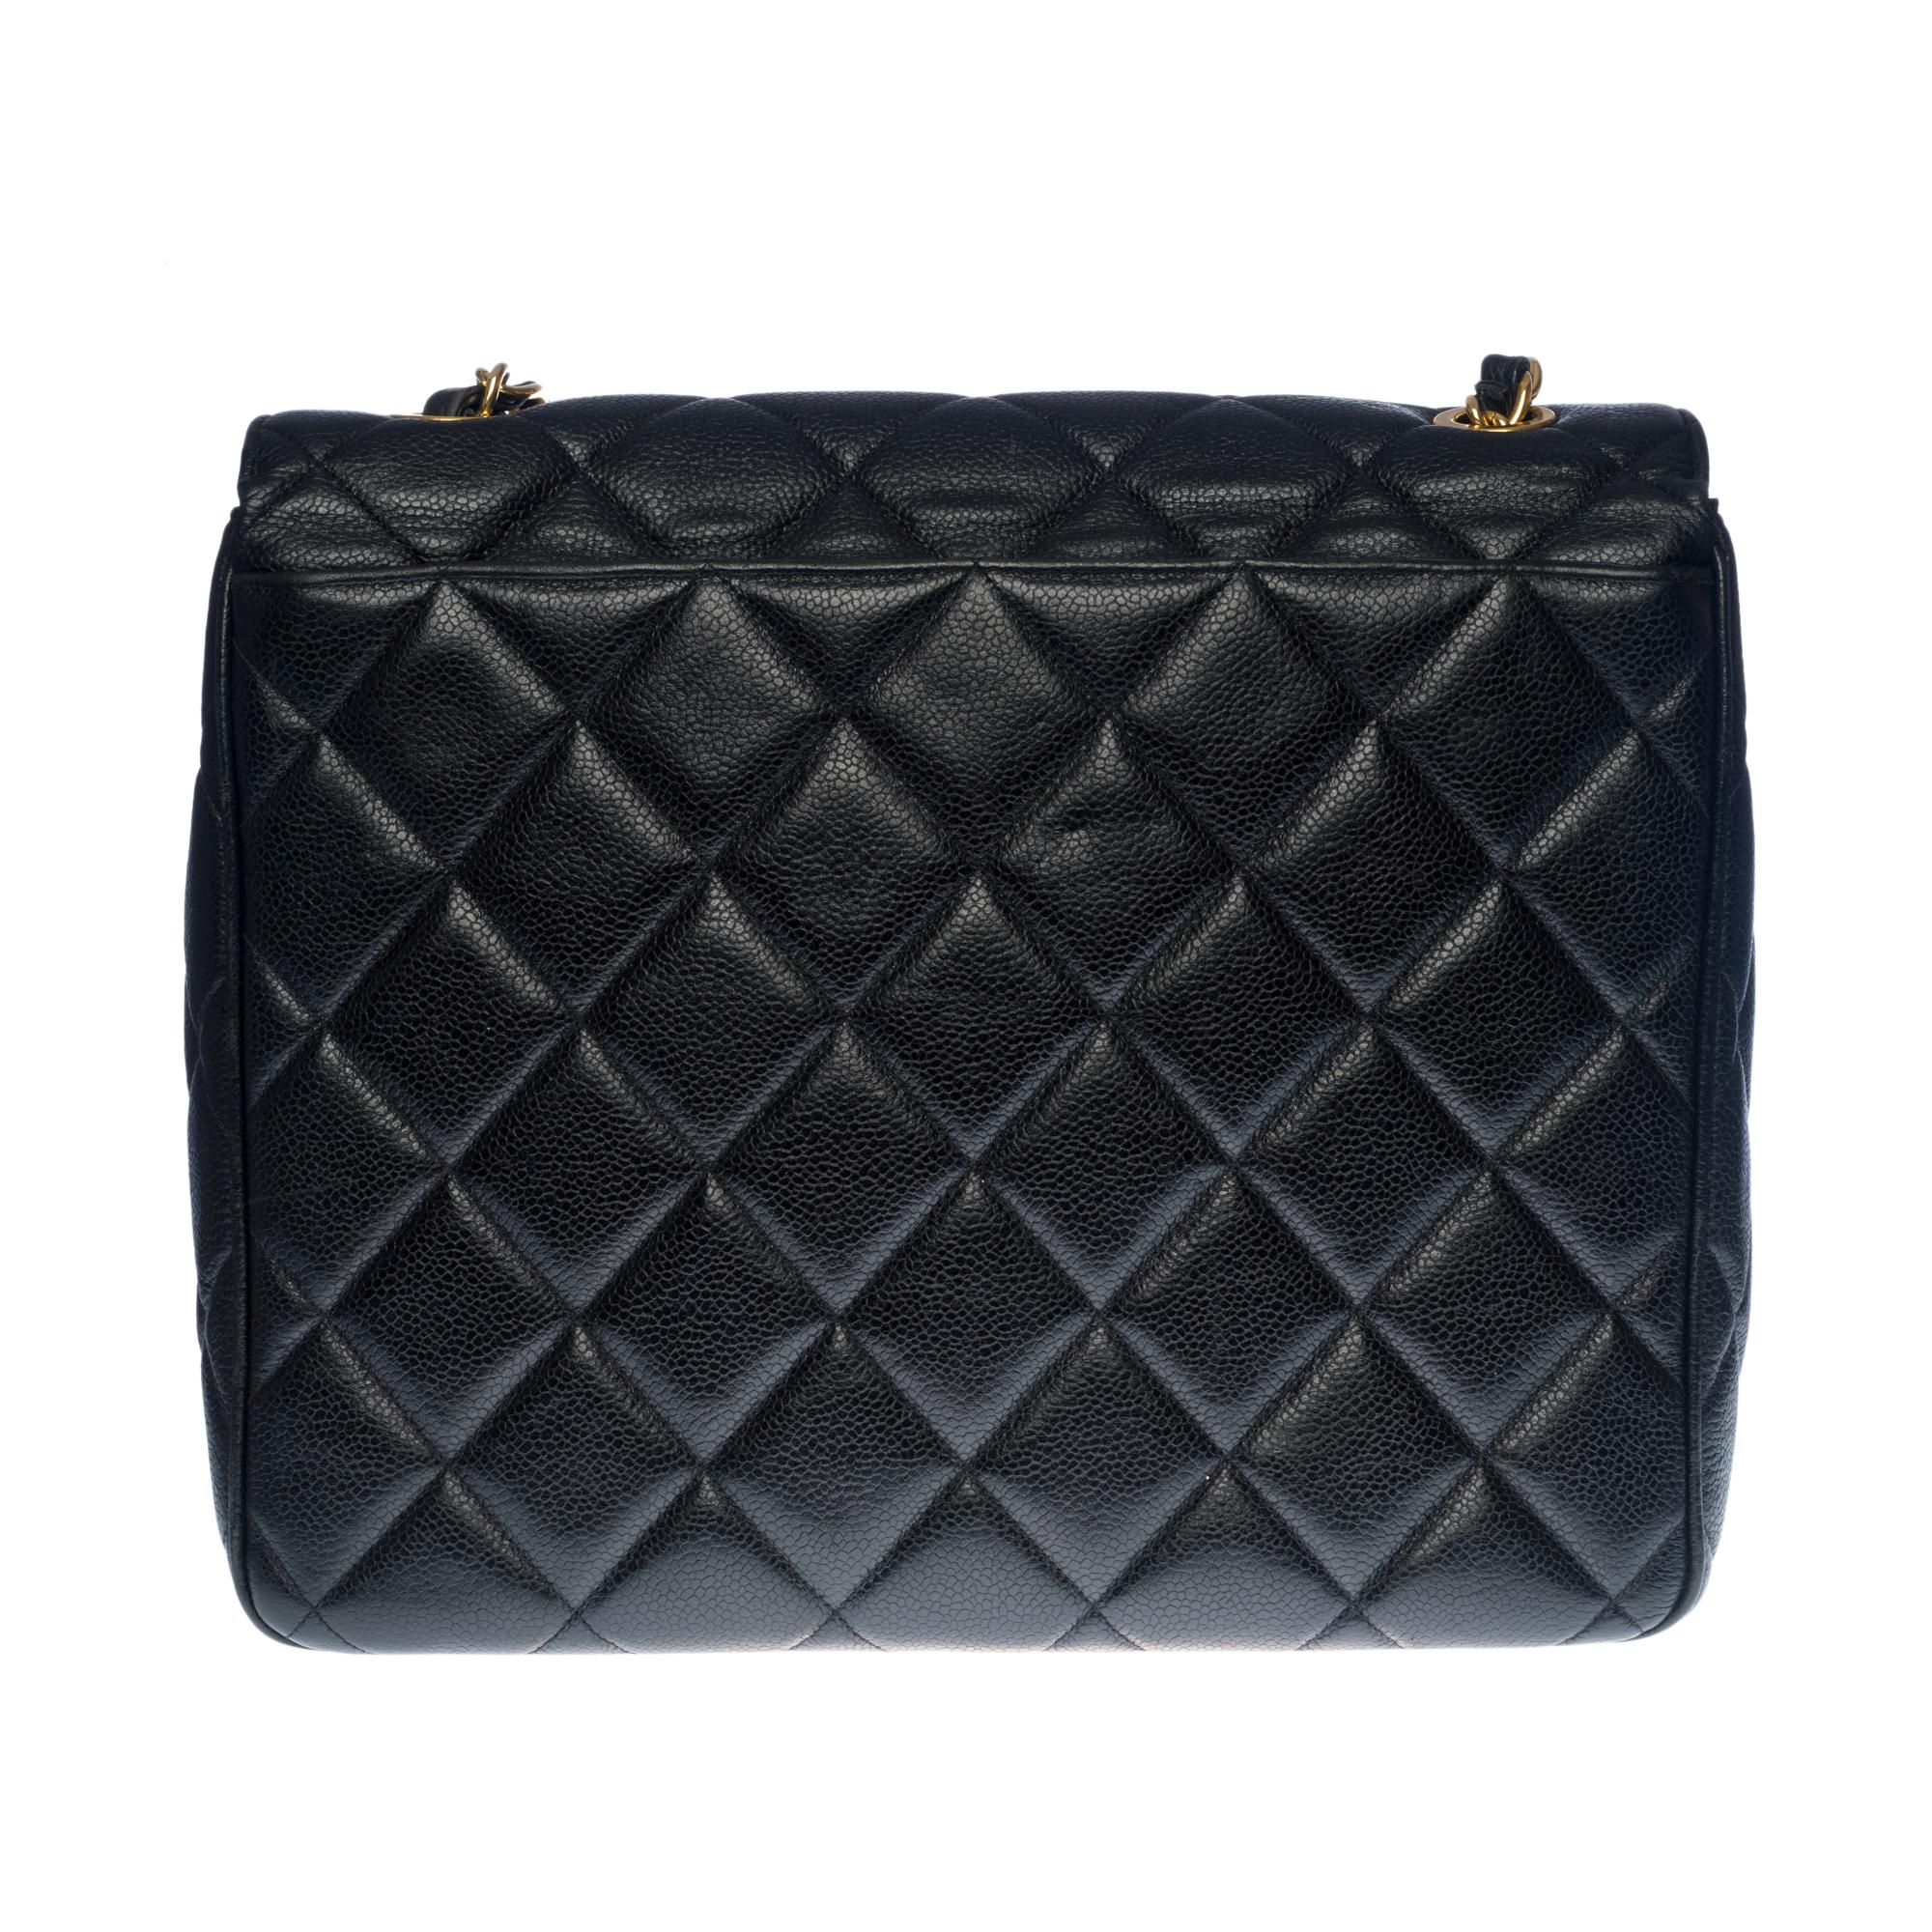 Splendid Chanel Maxi Flap shoulder bag in black quilted caviar leather, gold-plated hardware, a gold-plated metal chain handle interlaced with black caviar leather for a shoulder support
Backpack pocket
Flap closure, gold CC logo clasp
Single